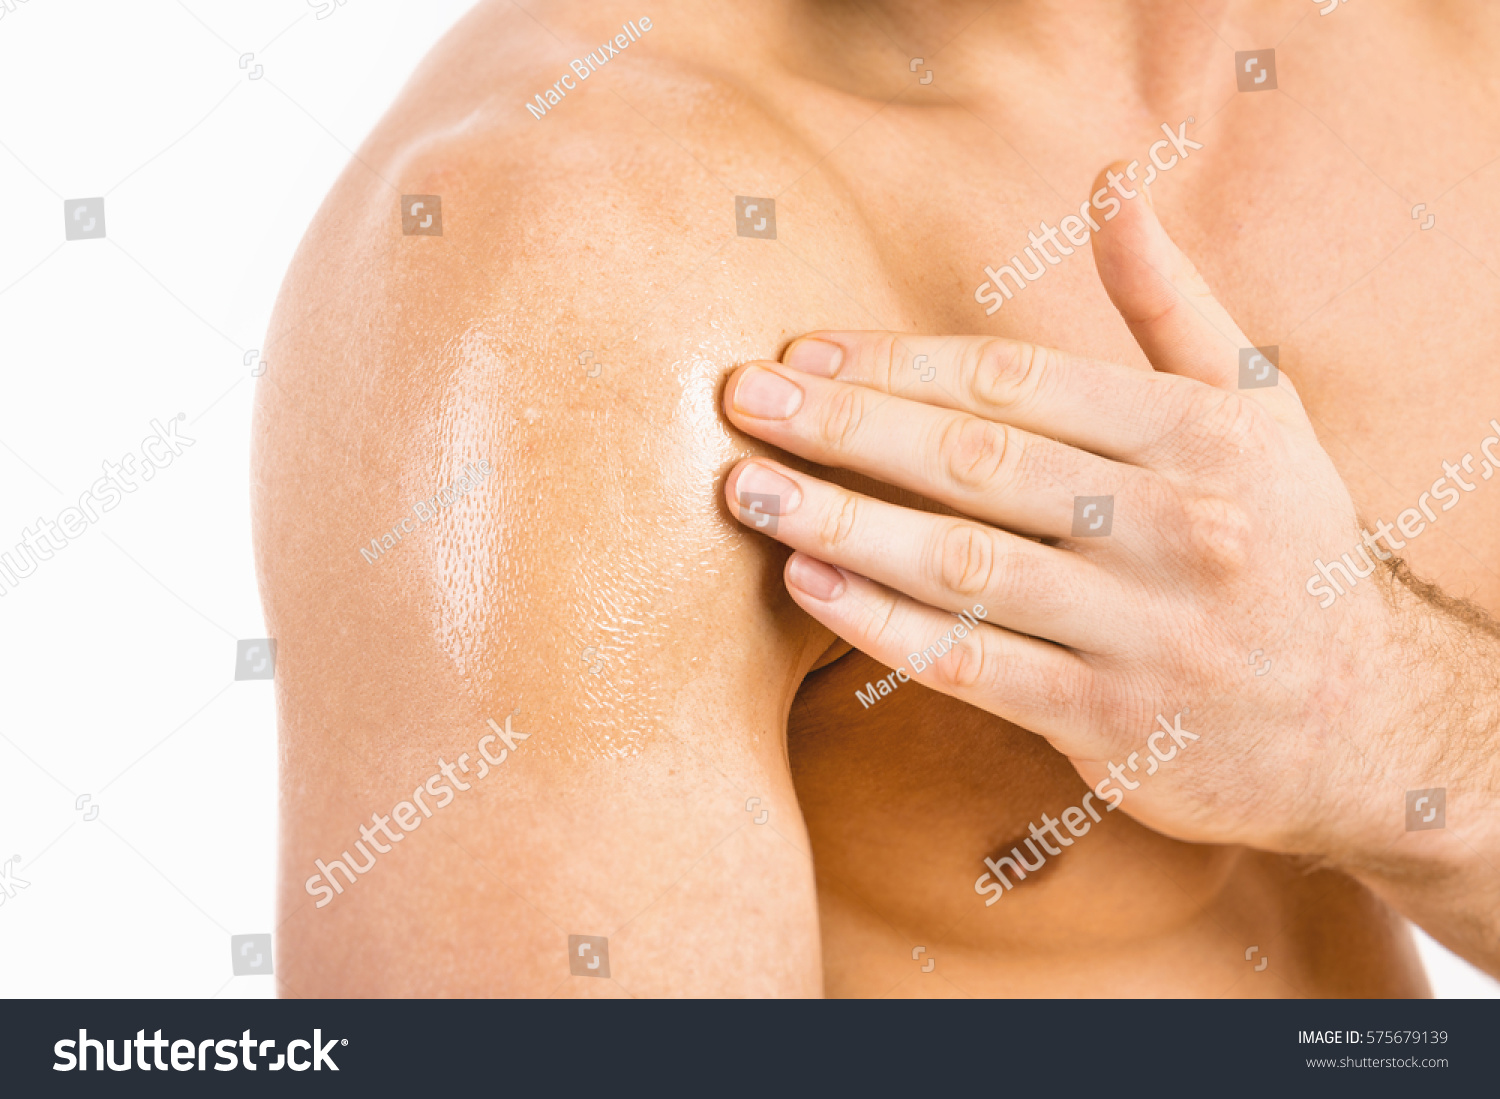 Testosterone Replacement Therapy (TRT) - Muscular man applying testosterone gel on shoulder #575679139